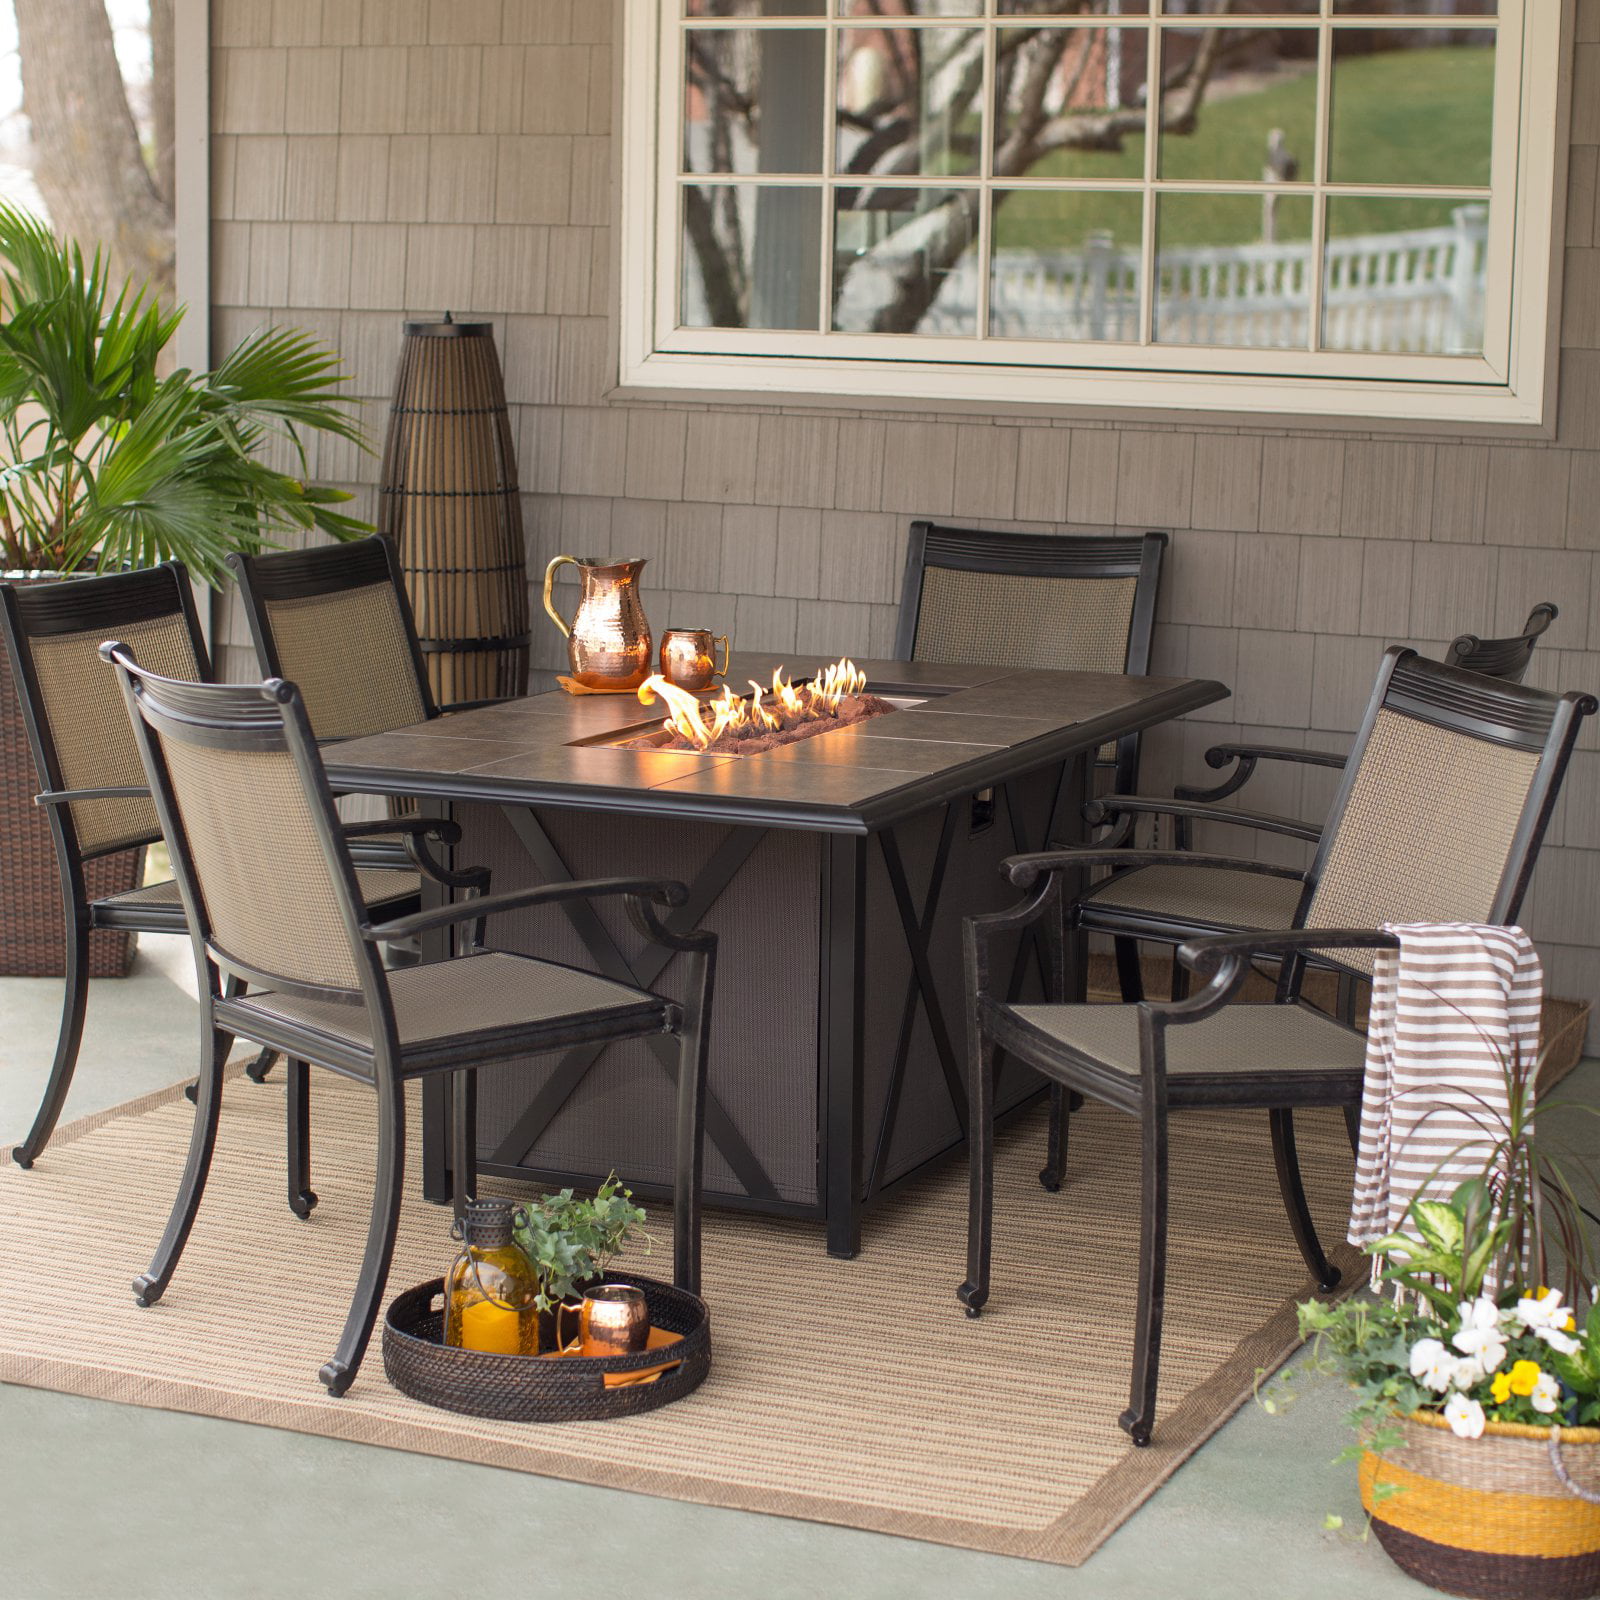 Patio Dining Table With Fire Pit - Home Ideas